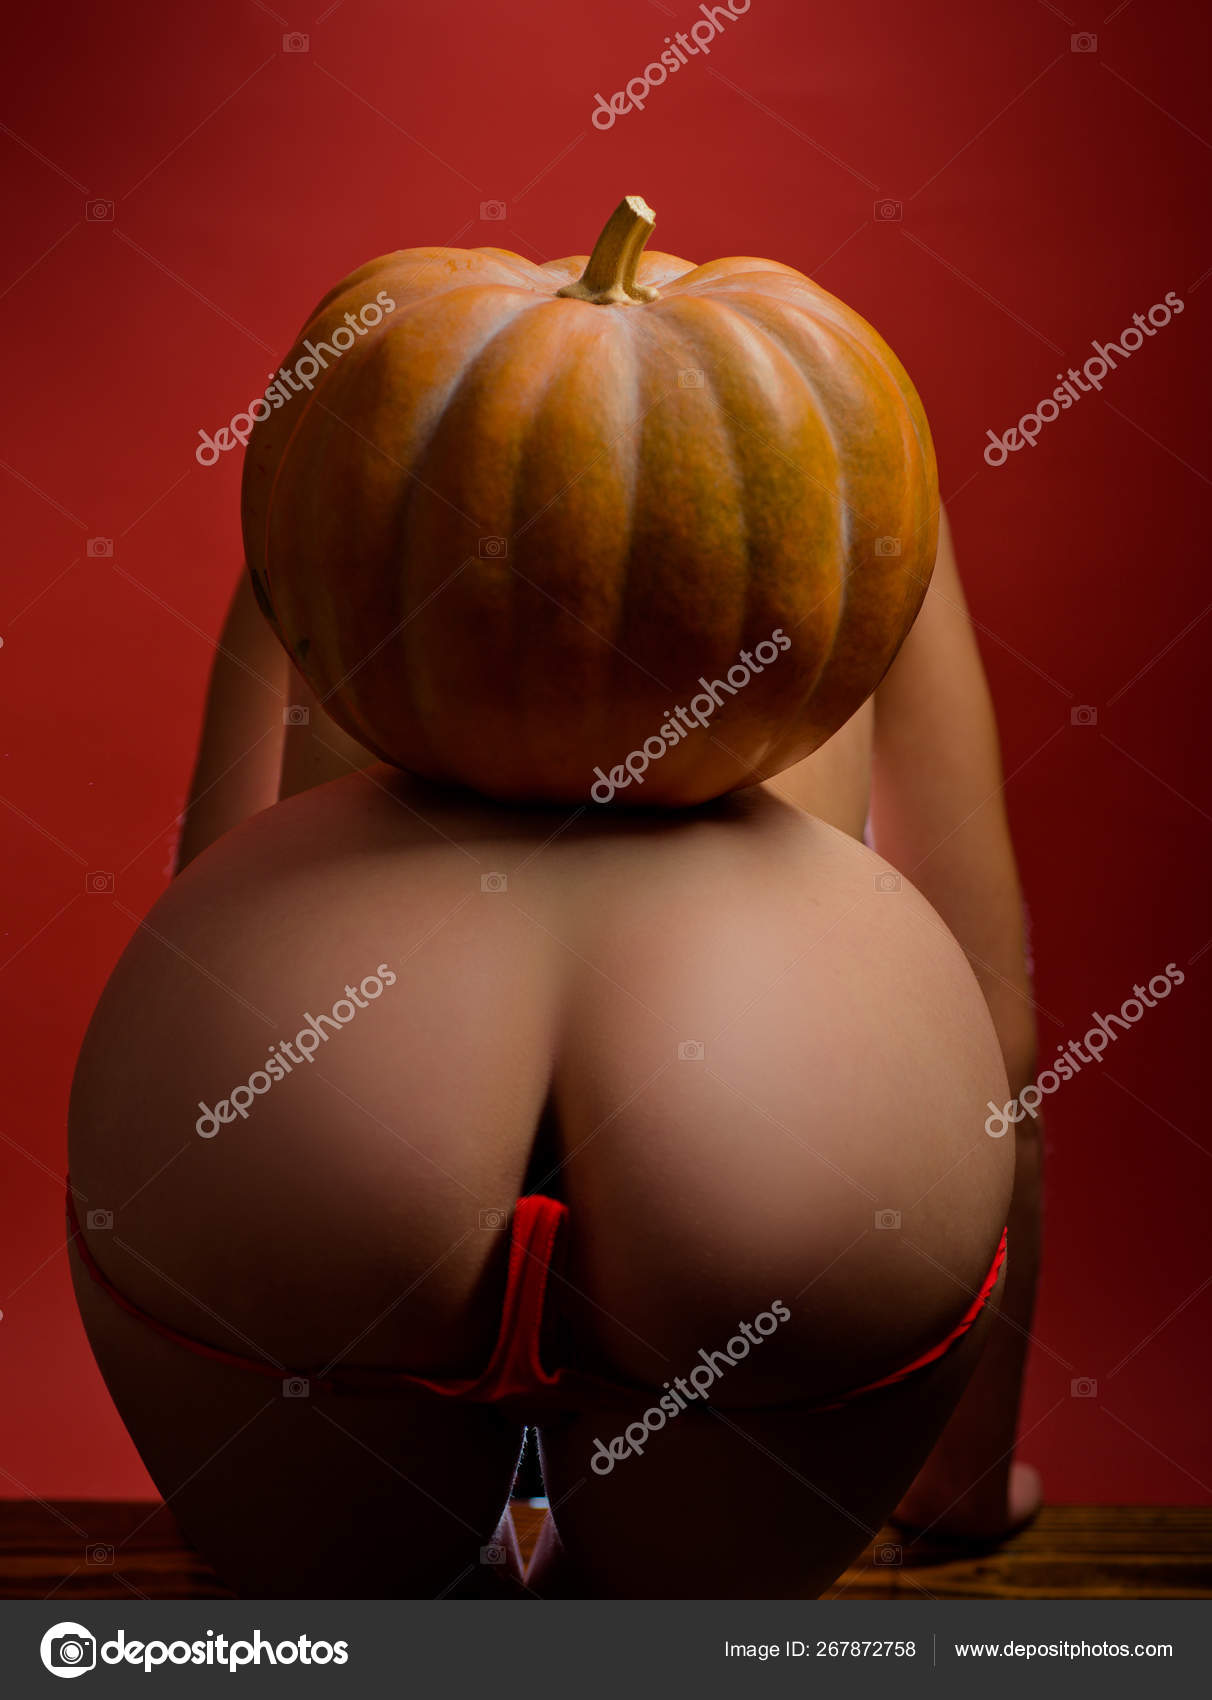 Female with sexy ass posing. Pose for sex and kamasutra concept. Love position sensual woman. Anal sex and female orgasm. Sale on sex shop. Sexual costume picture